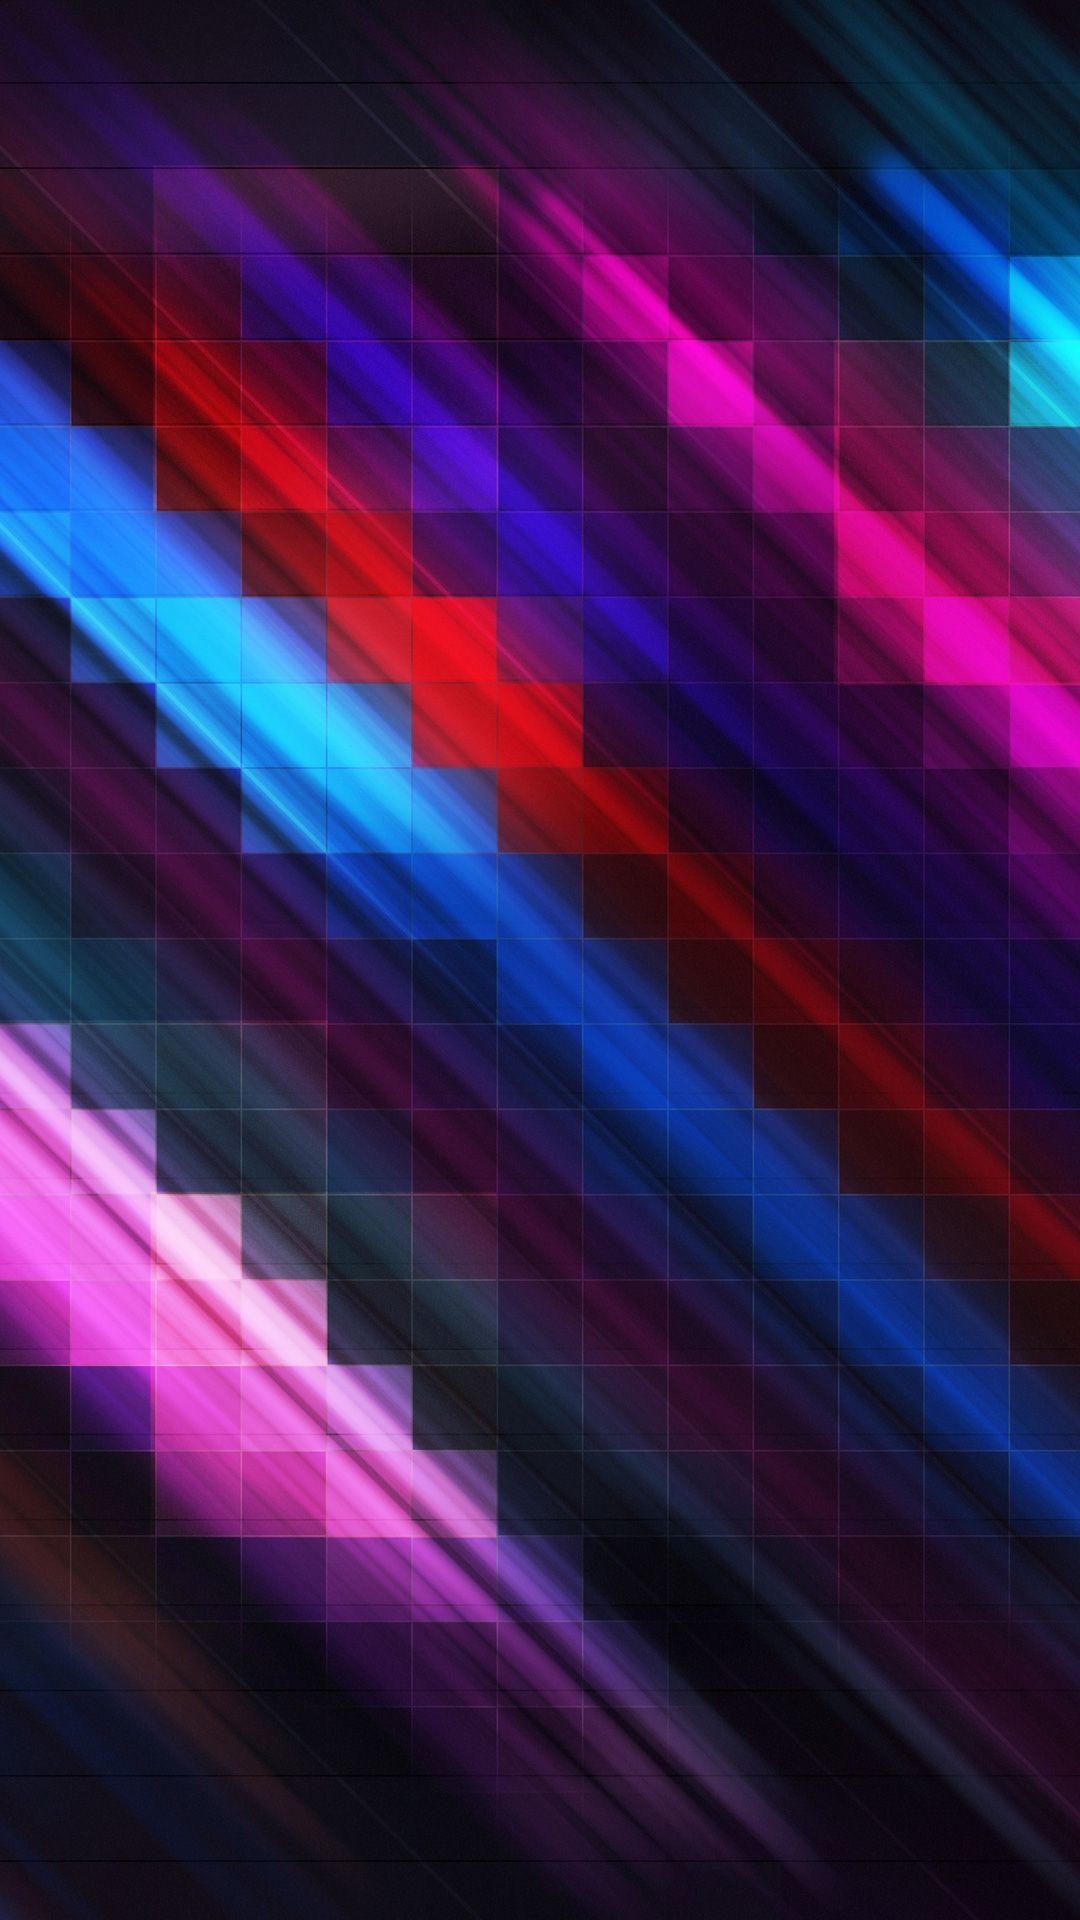 awesome wallpapers hd for mobile,blue,violet,purple,light,line